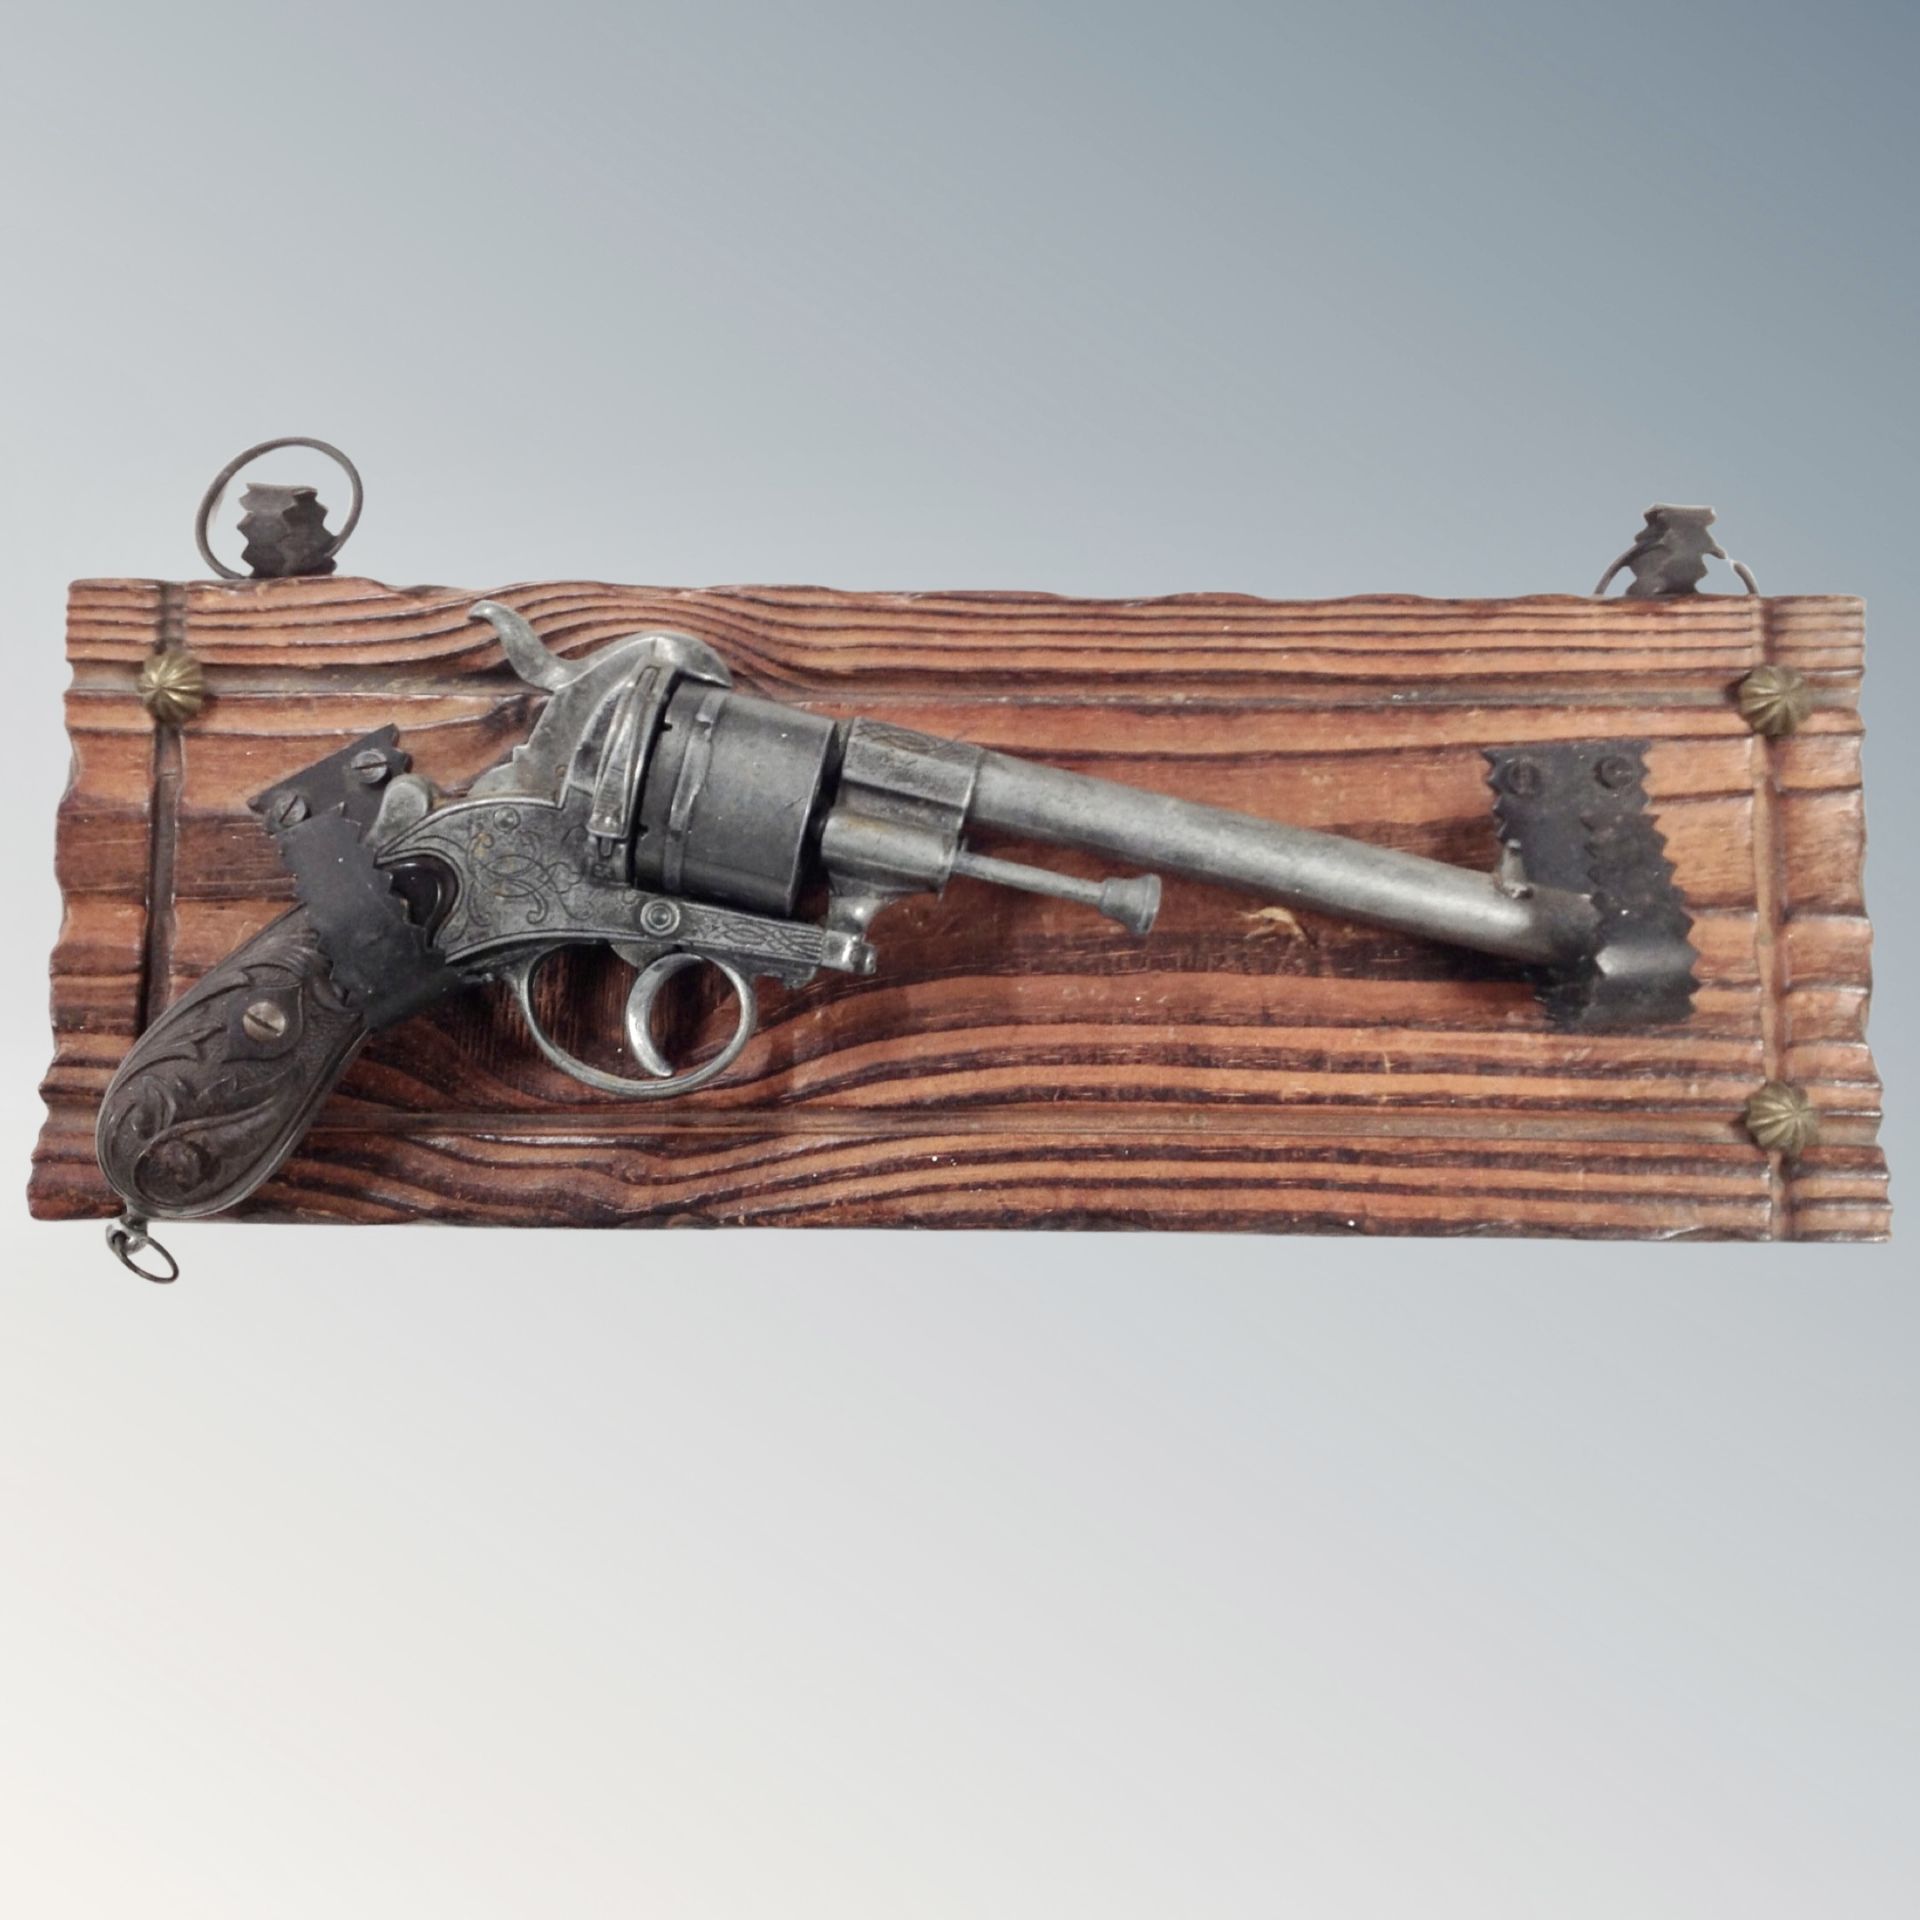 A decorative reproduction revolver mounted on a wooden plaque